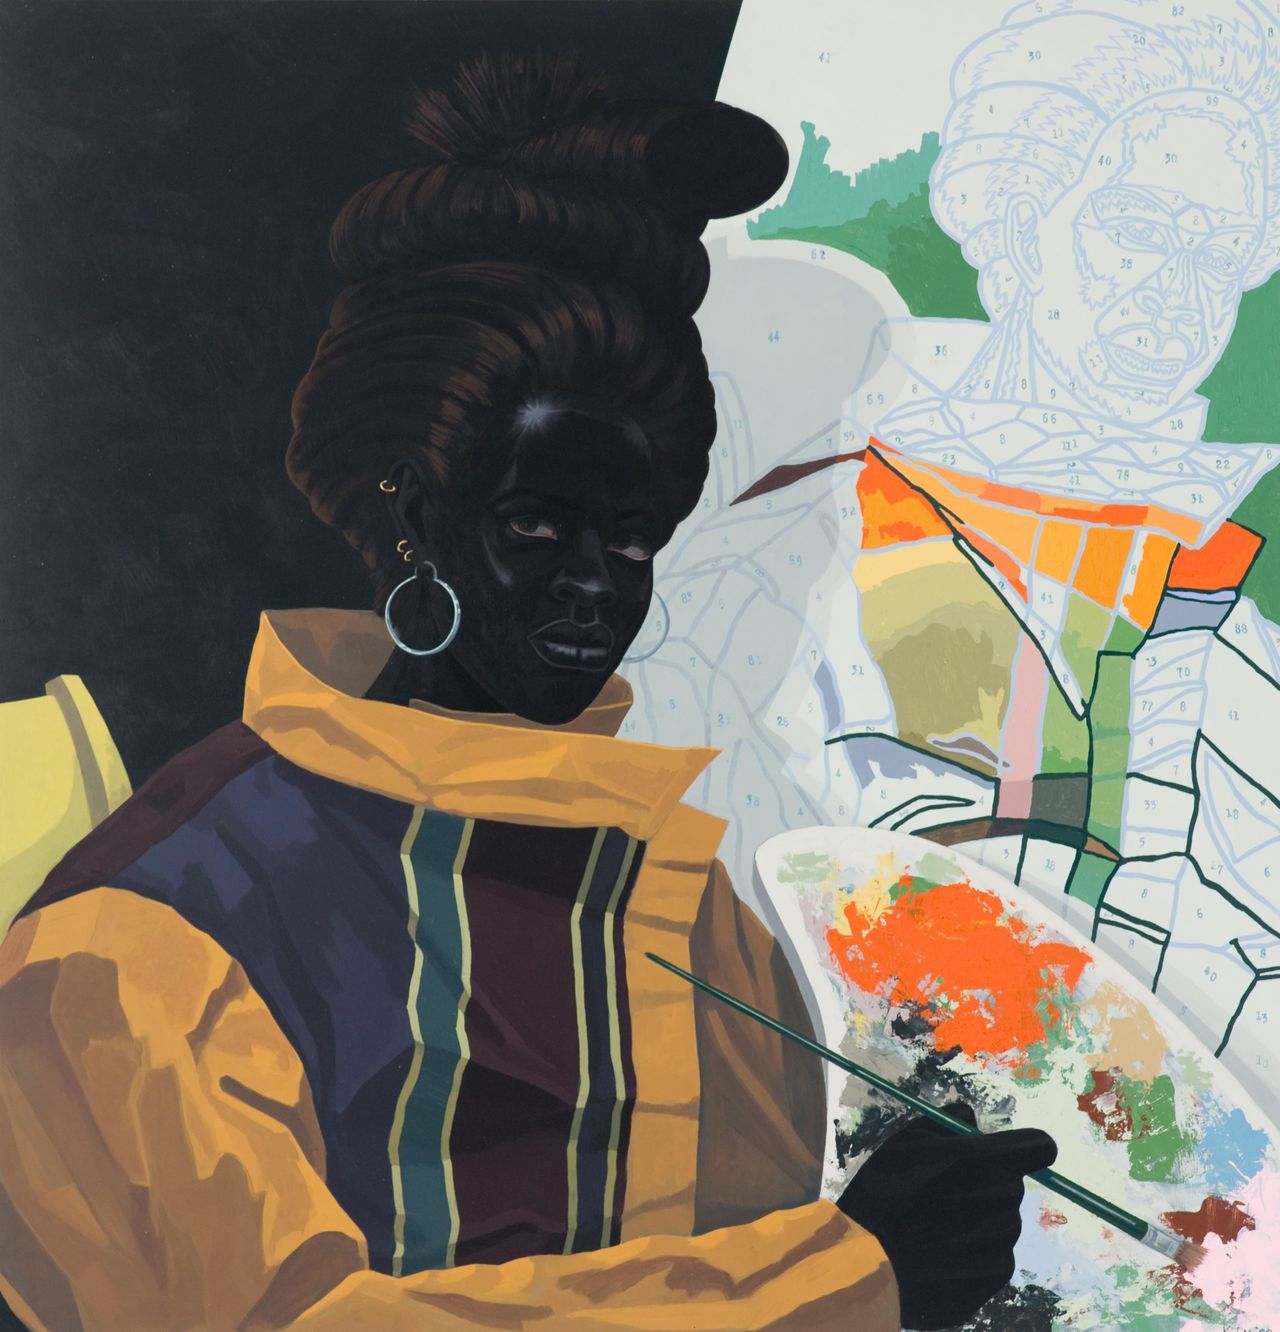 Kerry James Marshall, "Untitled (Painter)," 2009, Acrylic on PVC panel, Museum of Contemporary Art Chicago, gift of Katherine S. Schamberg by exchange.